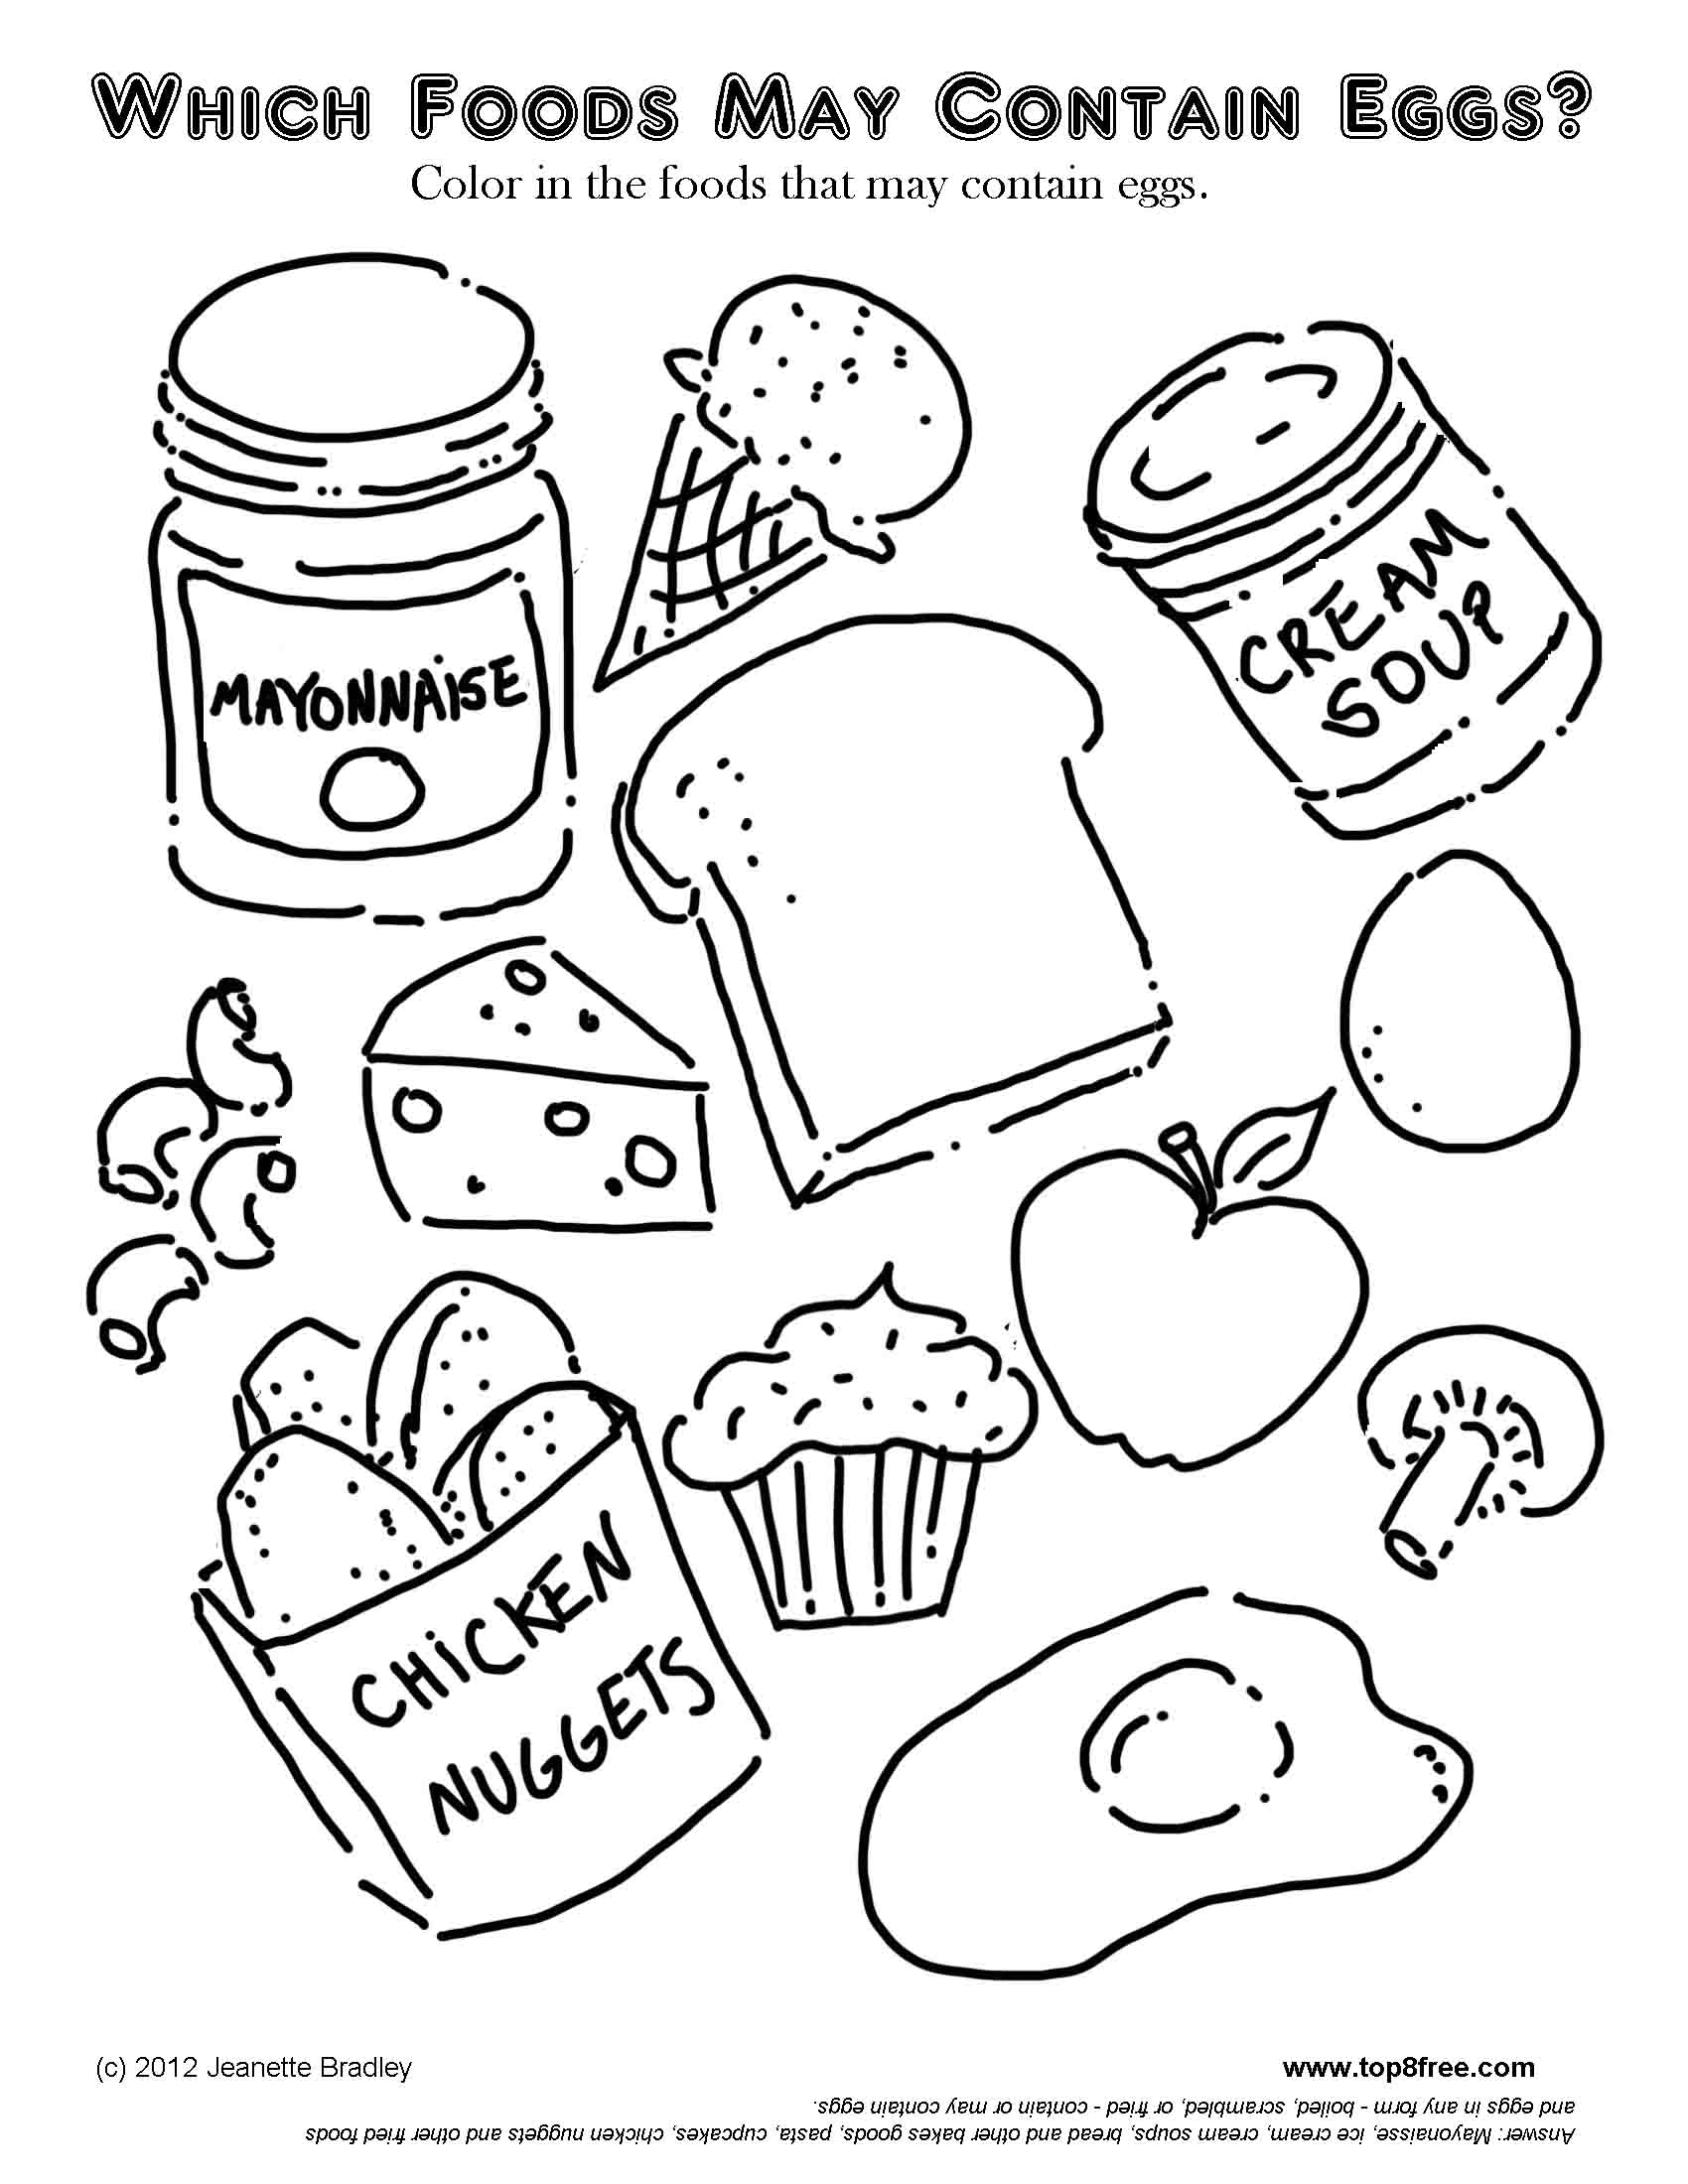 4 Best Images of Printable Pictures Of Food Items - Food Coloring Pages